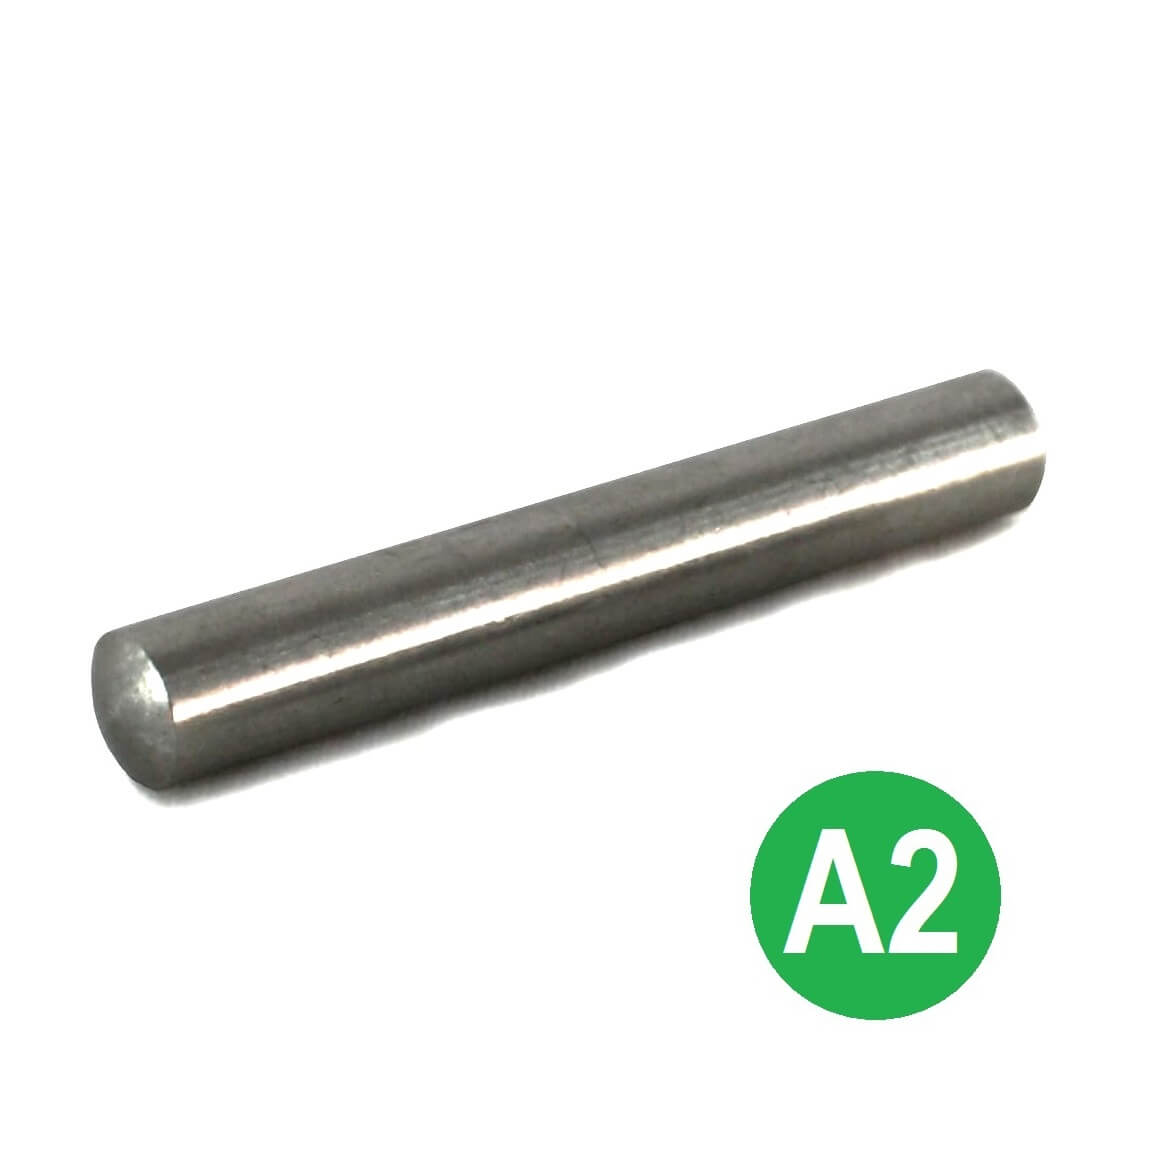 10mm Dia x 35mm A2 Stainless Dowel Pins DIN 7